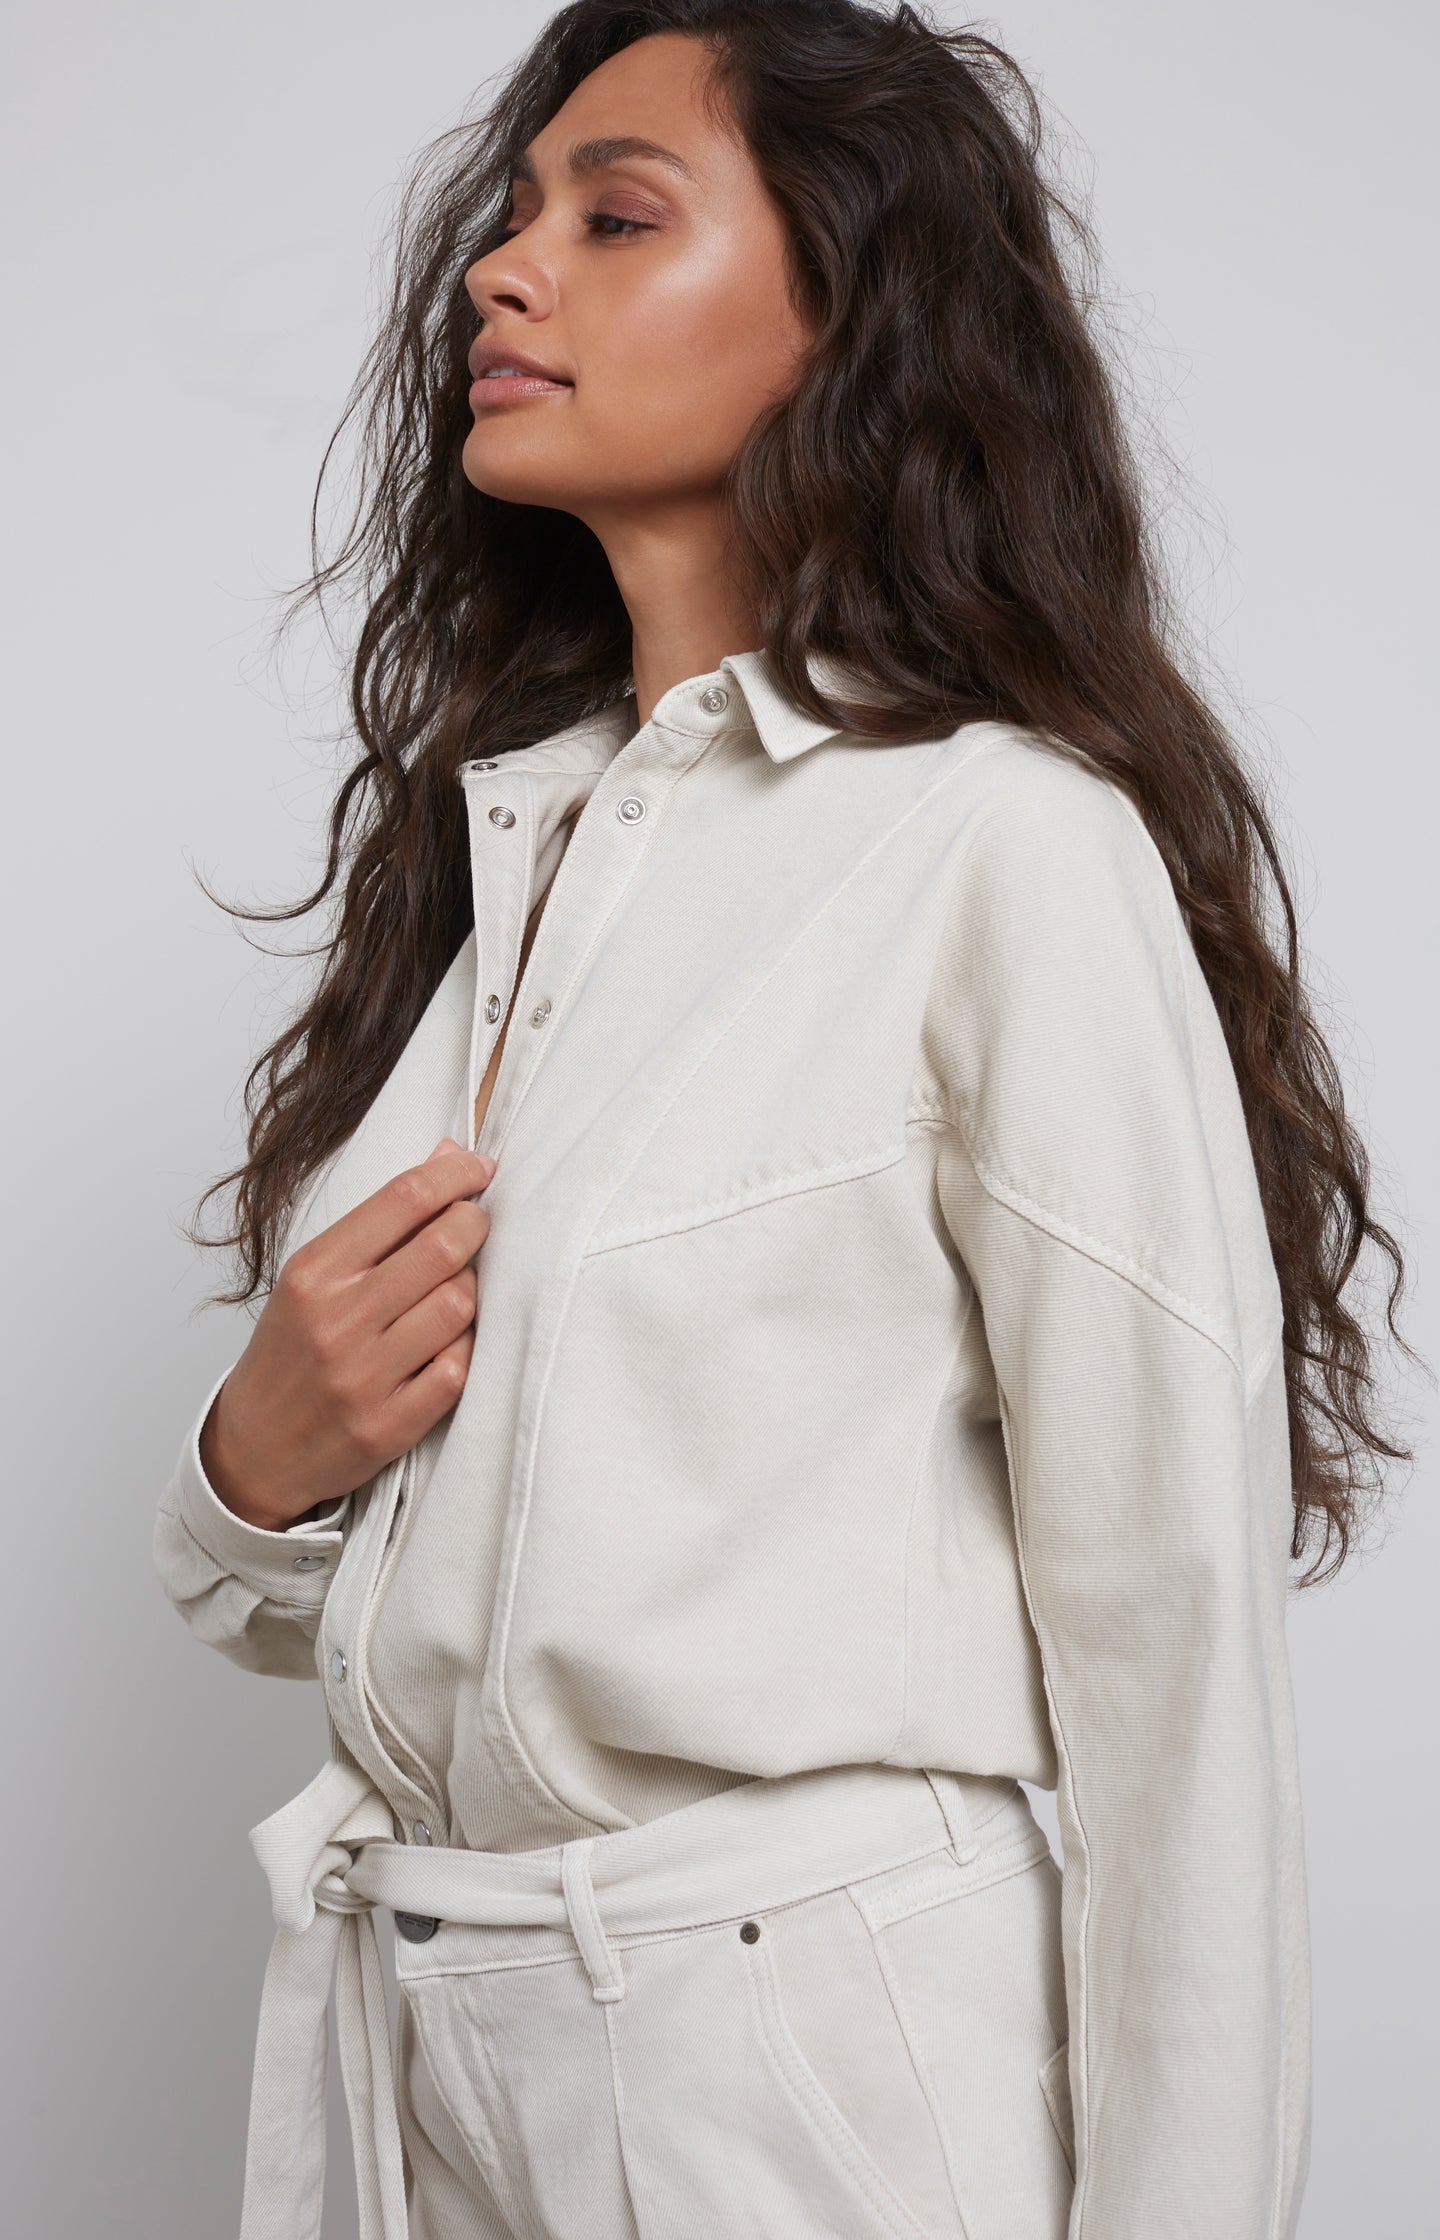 Blouse with long sleeves, press studs and seam details - Type: lookbook